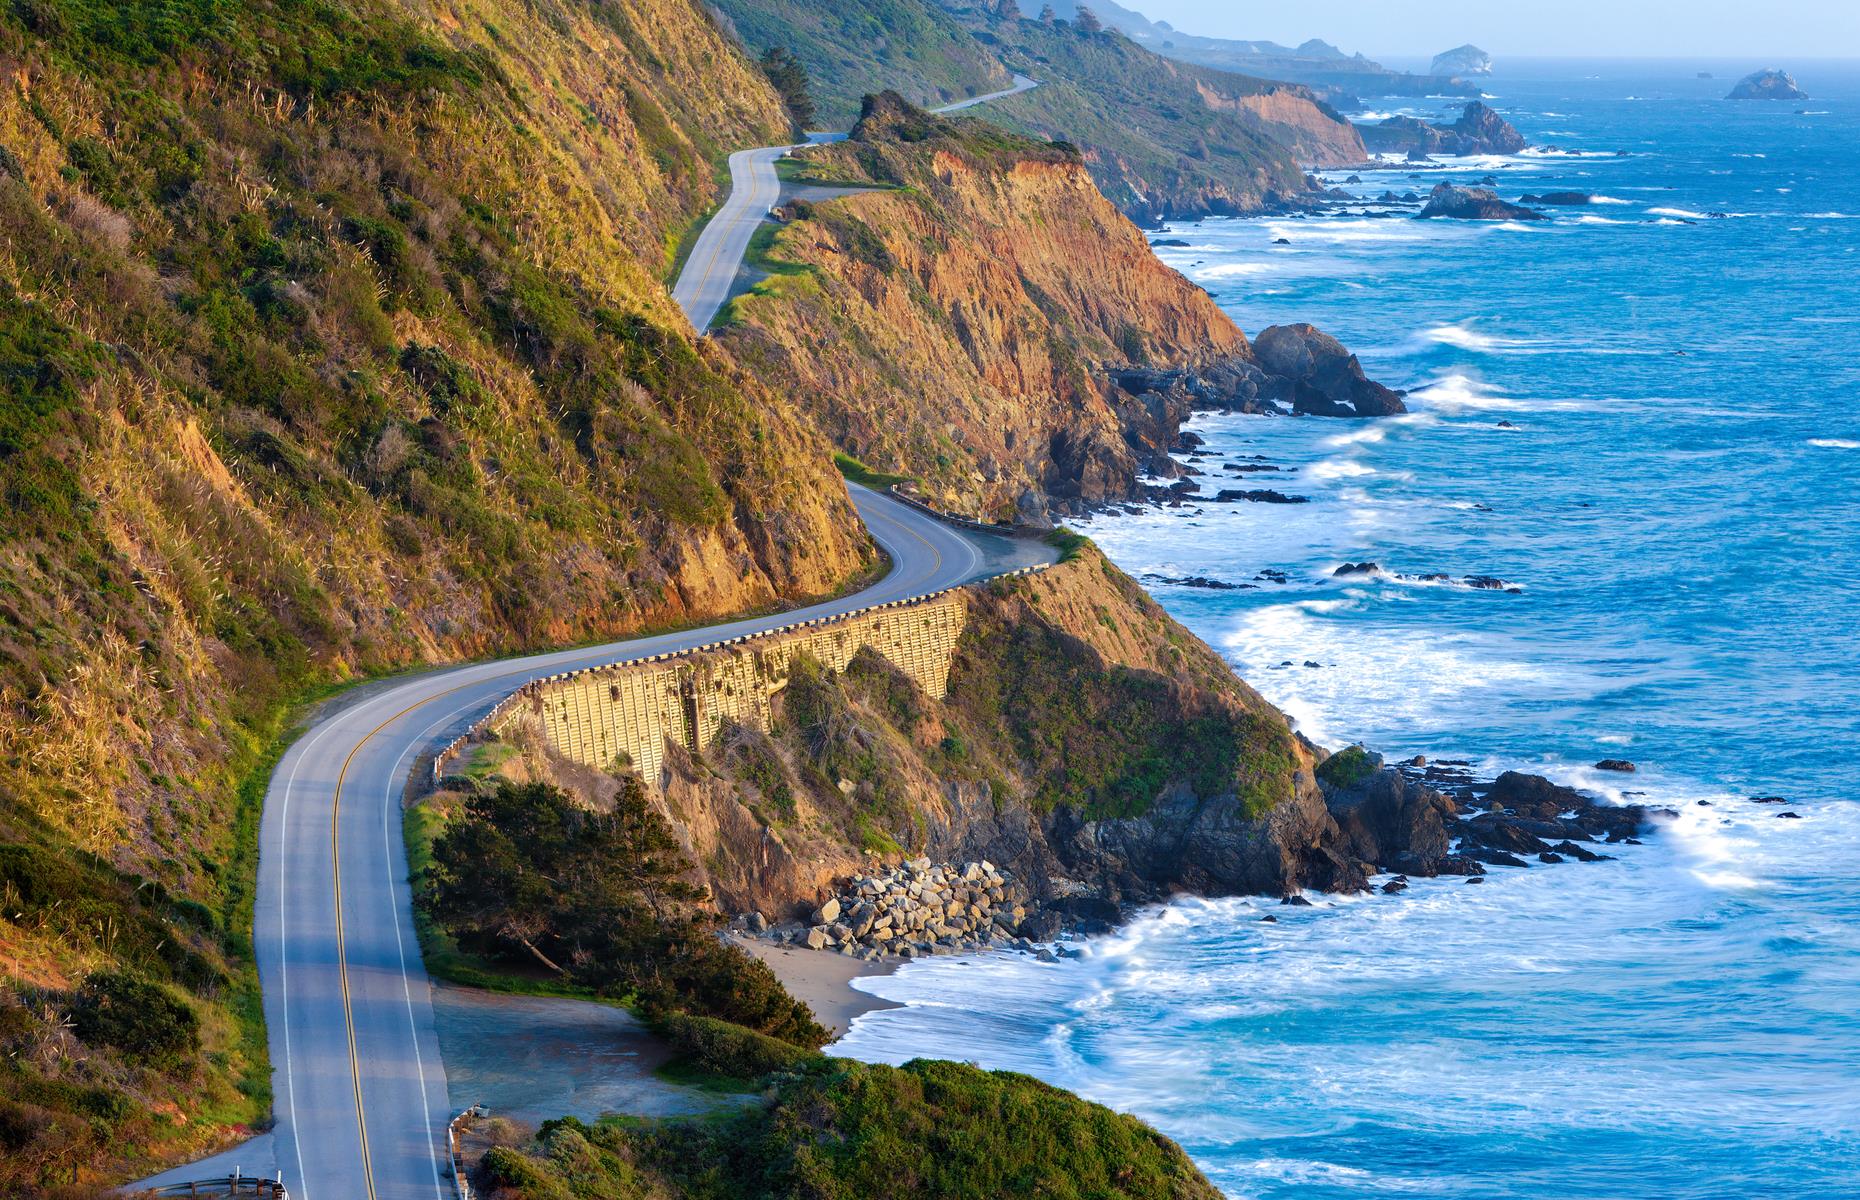 <p>It’s the classic, top-down, sunglasses on, sunny grin permanently plastered across your face road trip, and every weave and wiggle in this ocean-skimming route – also known as Highway 1 – is pretty ruddy gorgeous. Yet, somehow, <a href="https://www.visitcalifornia.com/uk/destination/spotlight-big-sur">Big Sur</a> manages to dial up the drama even more. As the highway curls around this portion south of San Francisco, the cliffs feel closer, the sand creamier, the redwoods taller, and the water more intensely teal and turquoise. <a href="https://www.loveexploring.com/guides/88203/californias-central-coast-road-trip-the-top-things-to-do-where-to-stay-">Don't miss our guide to California's Central Coast</a>.</p>